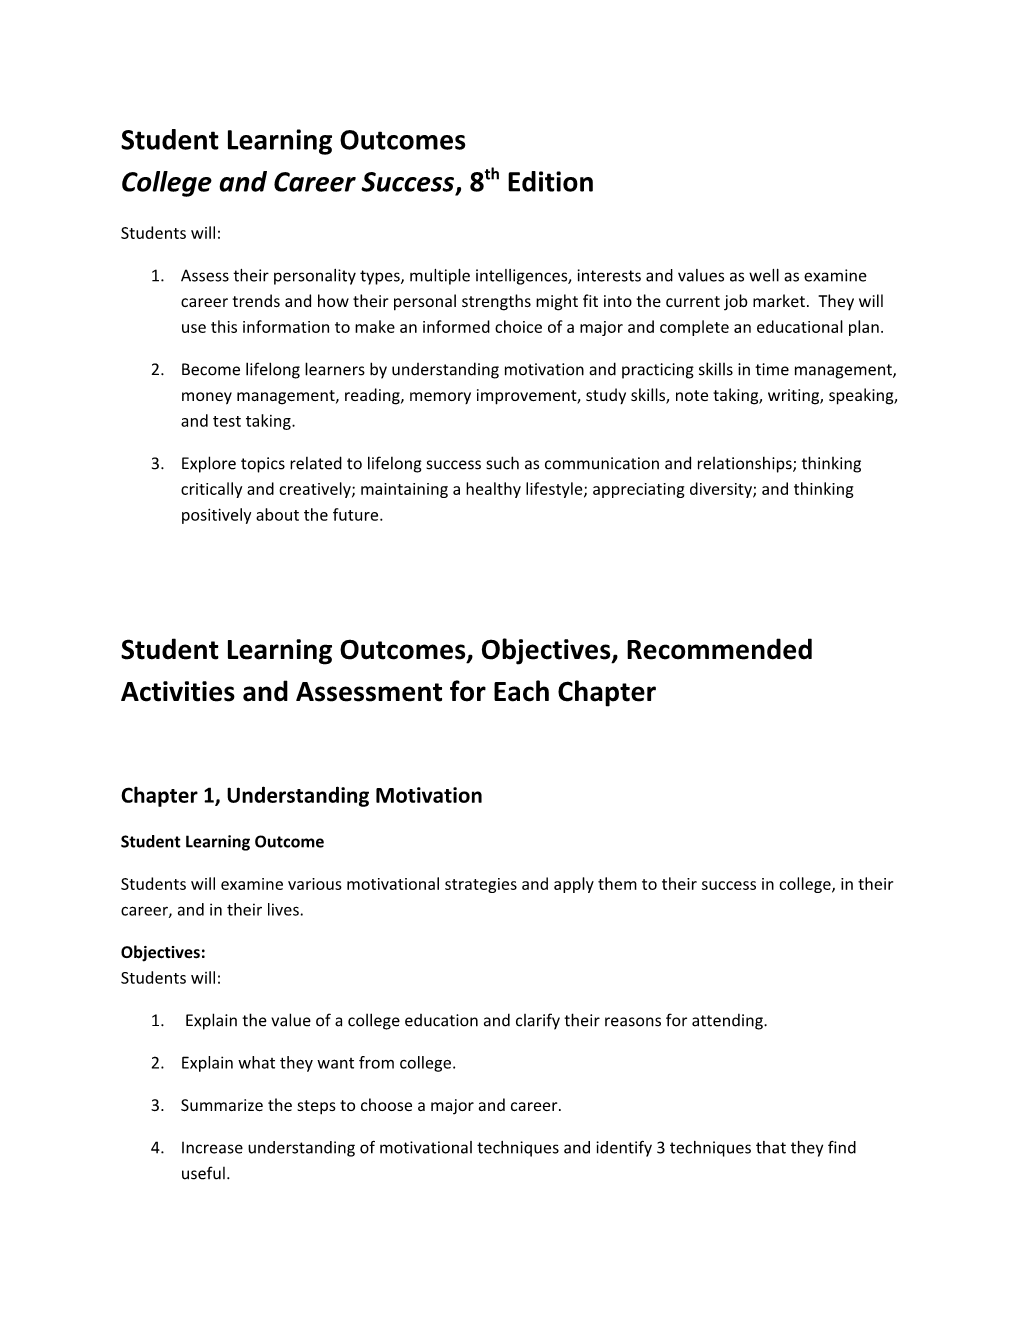 Student Learning Outcomes College and Career Success, 8Th Edition